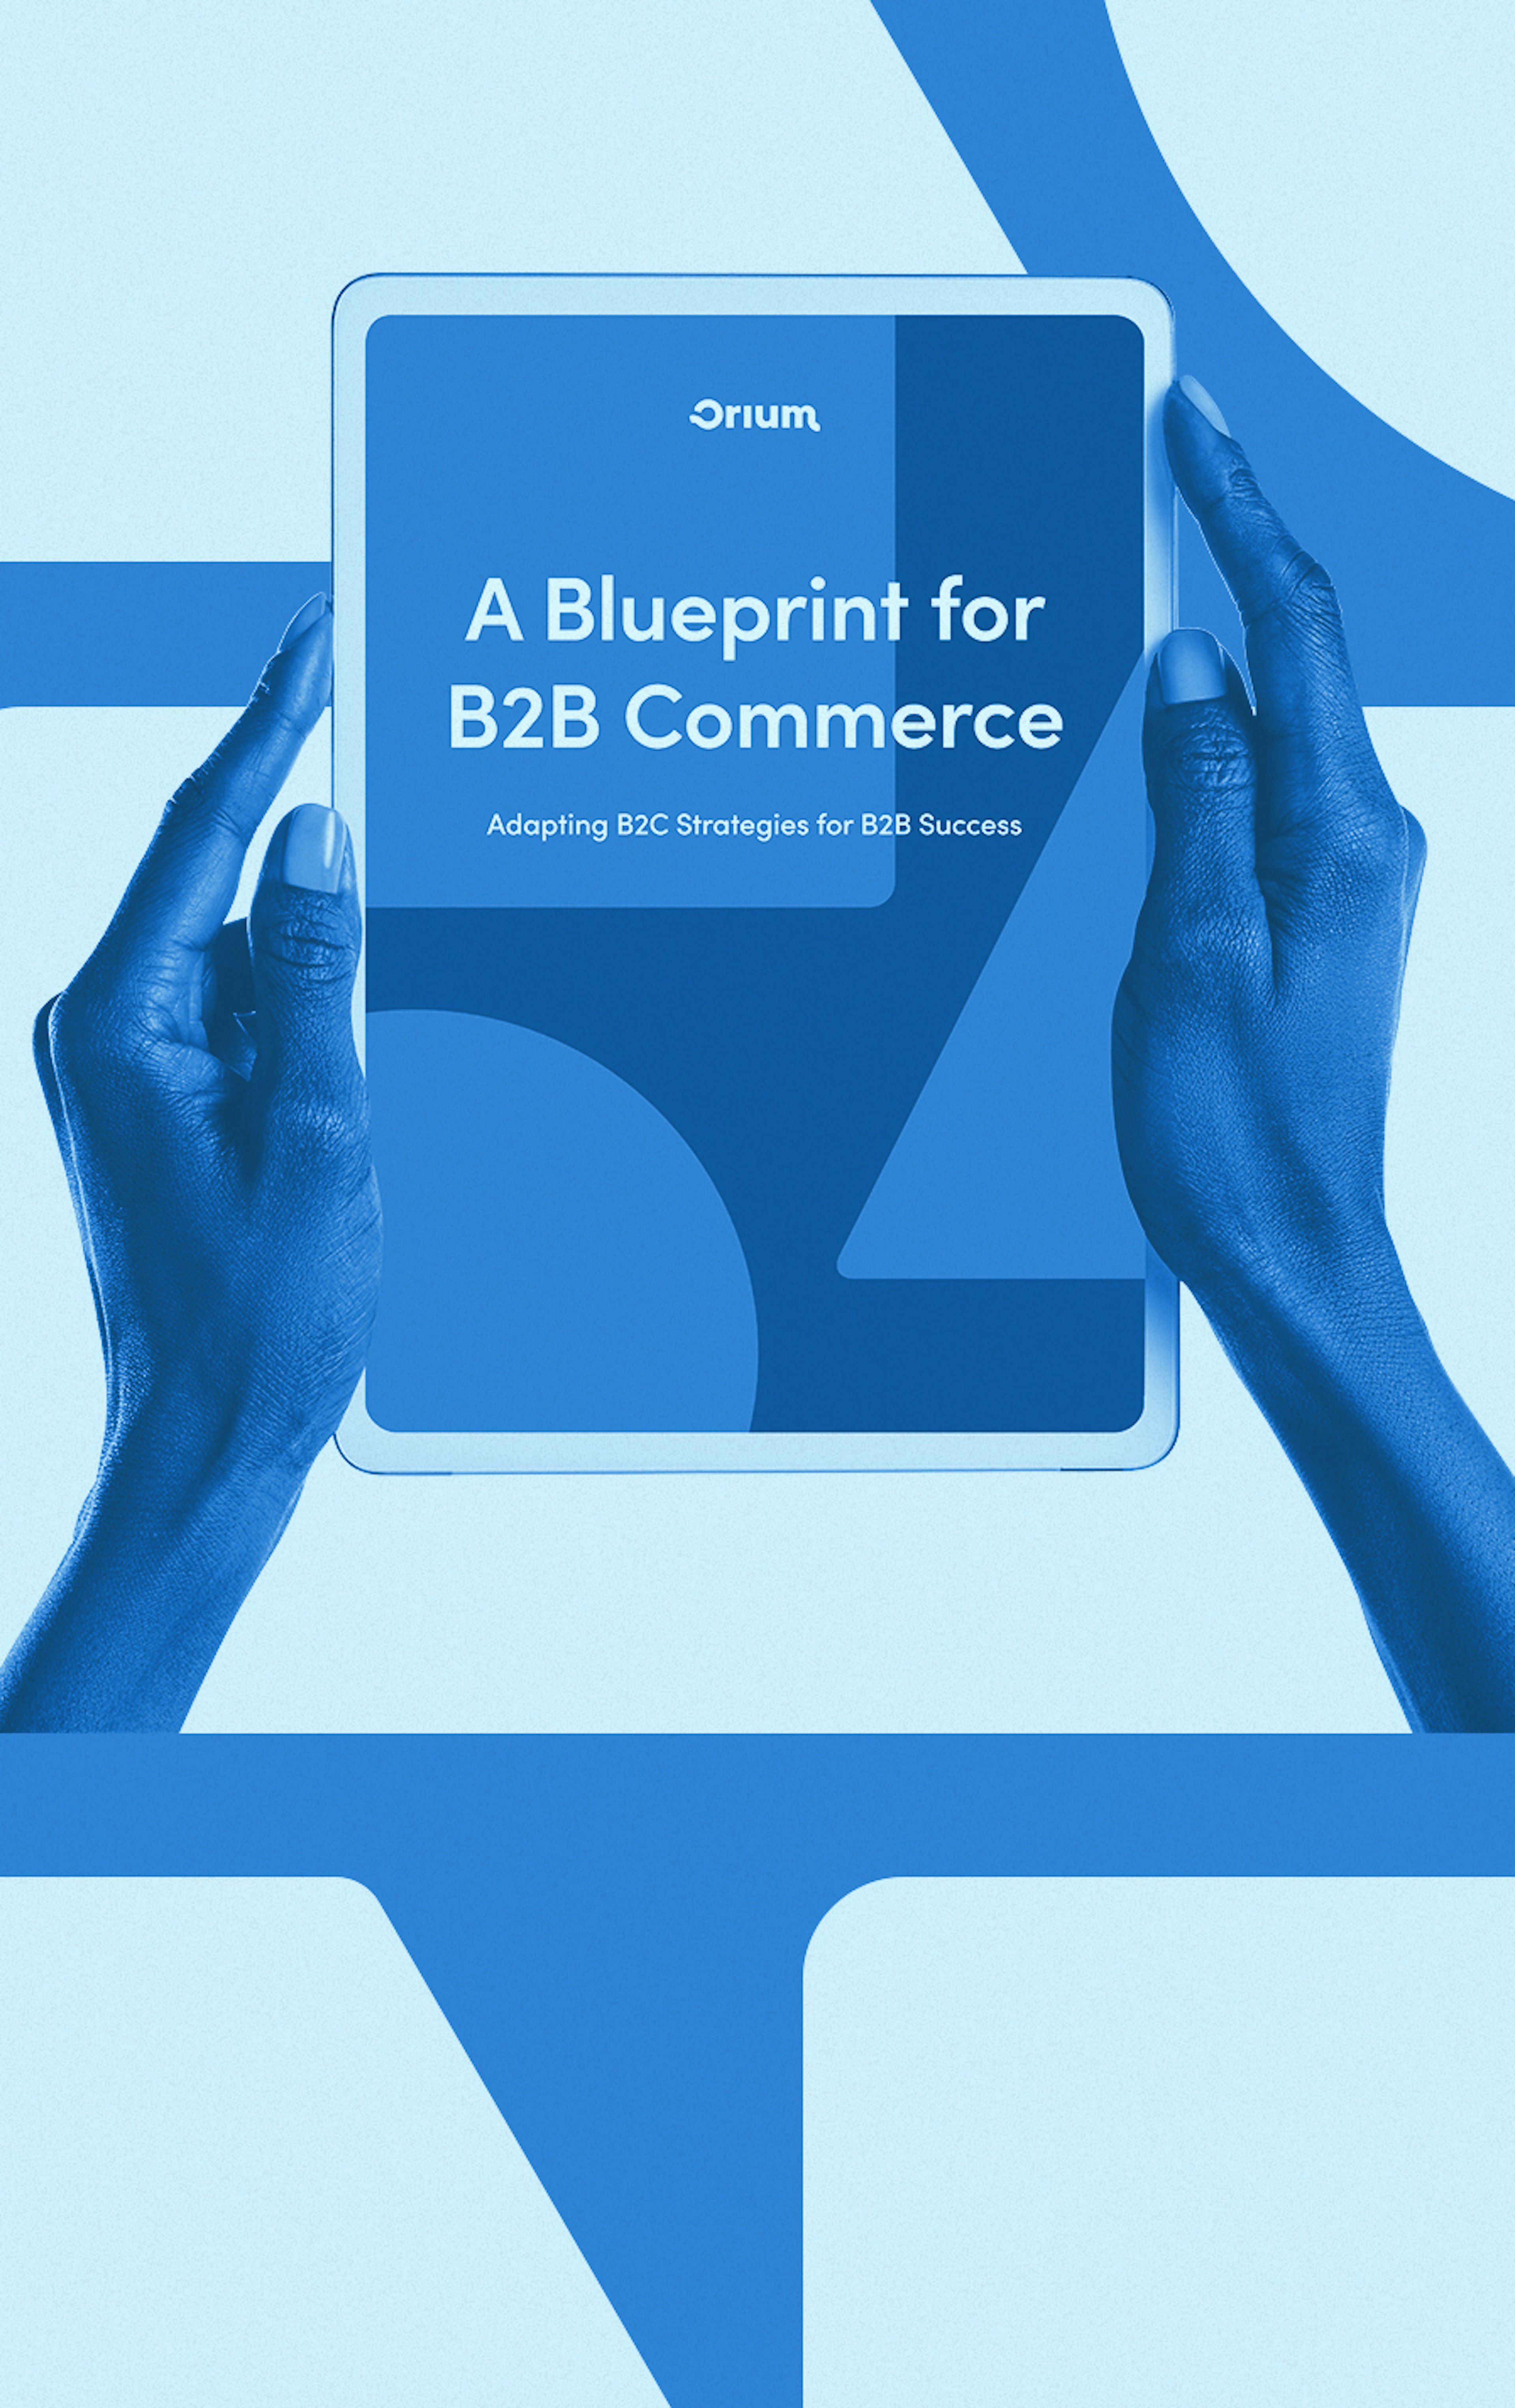 A patterned blue background with the cover of the B2B commerce report being held by two hands in the foreground